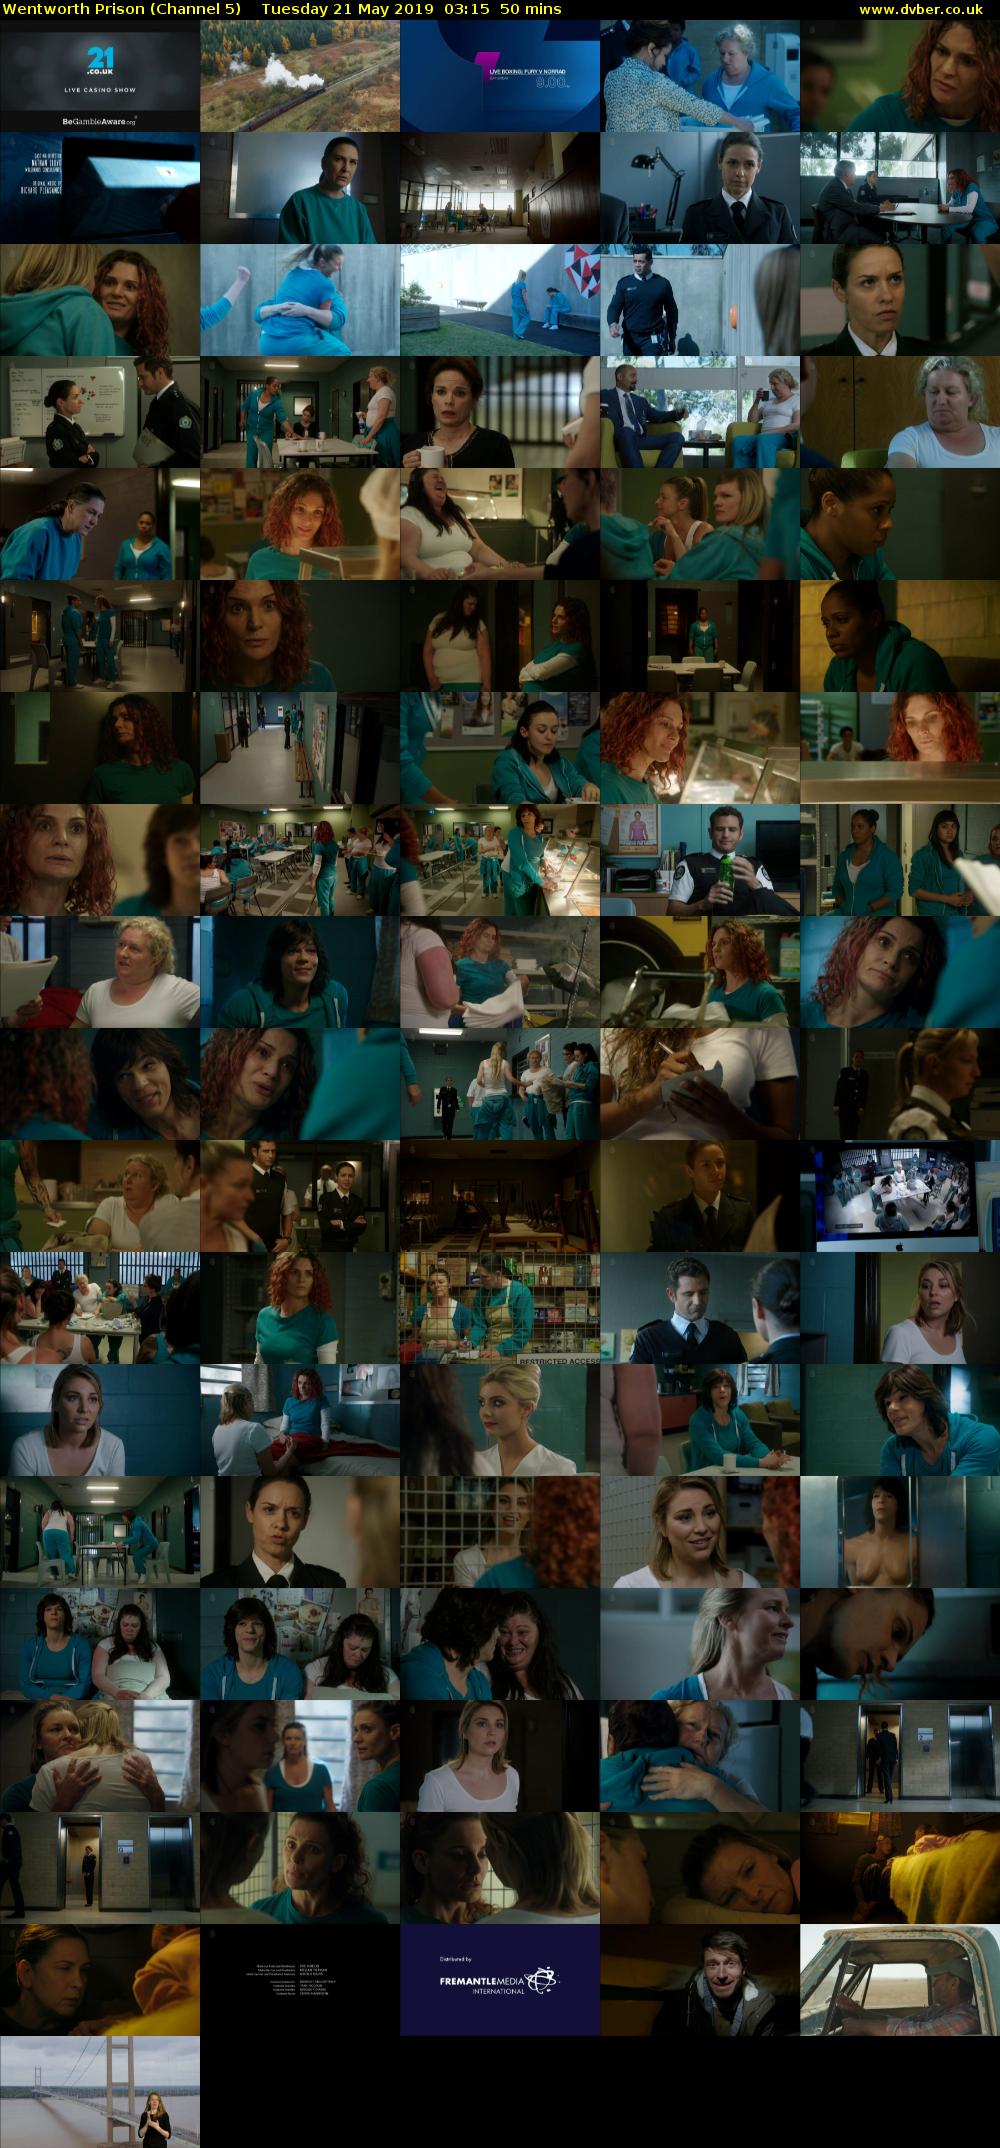 Wentworth Prison (Channel 5) Tuesday 21 May 2019 03:15 - 04:05